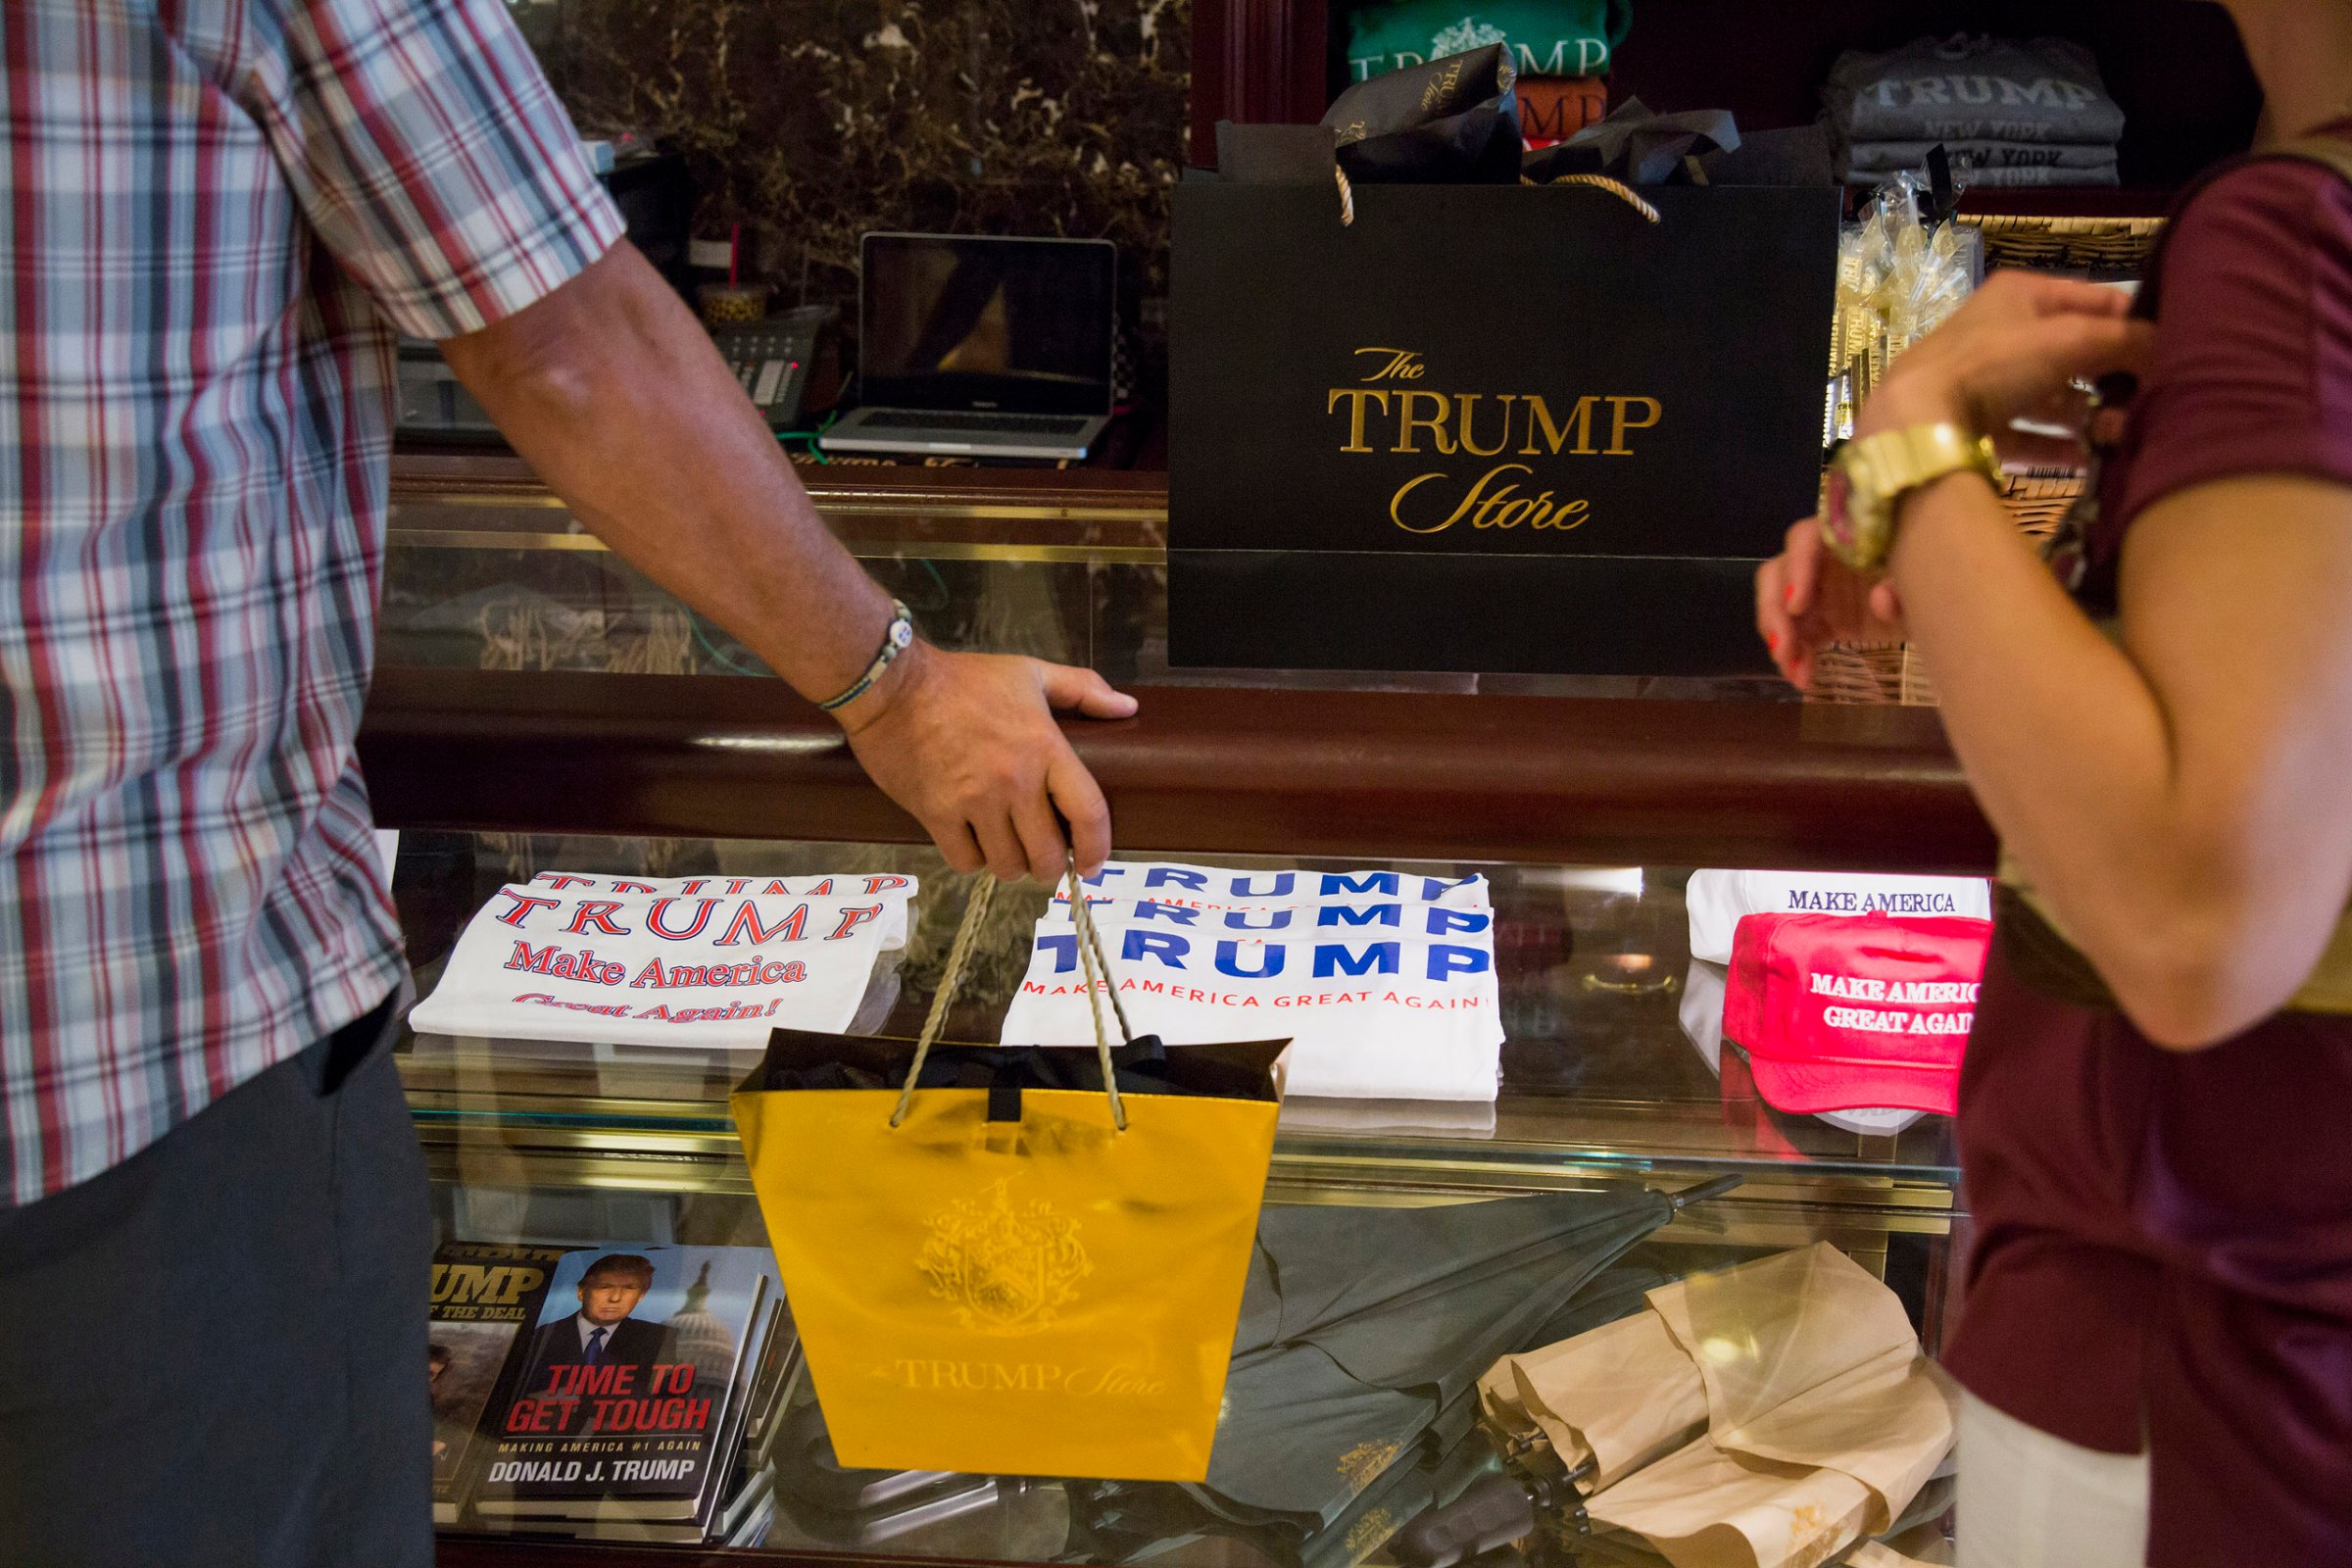 Shoppers purchase merchandise supporting Donald Trump, president and chief executive of Trump Organization Inc. and 2016 Republican presidential candidate, inside a store at Trump Tower in New York City on Aug. 26, 2015.